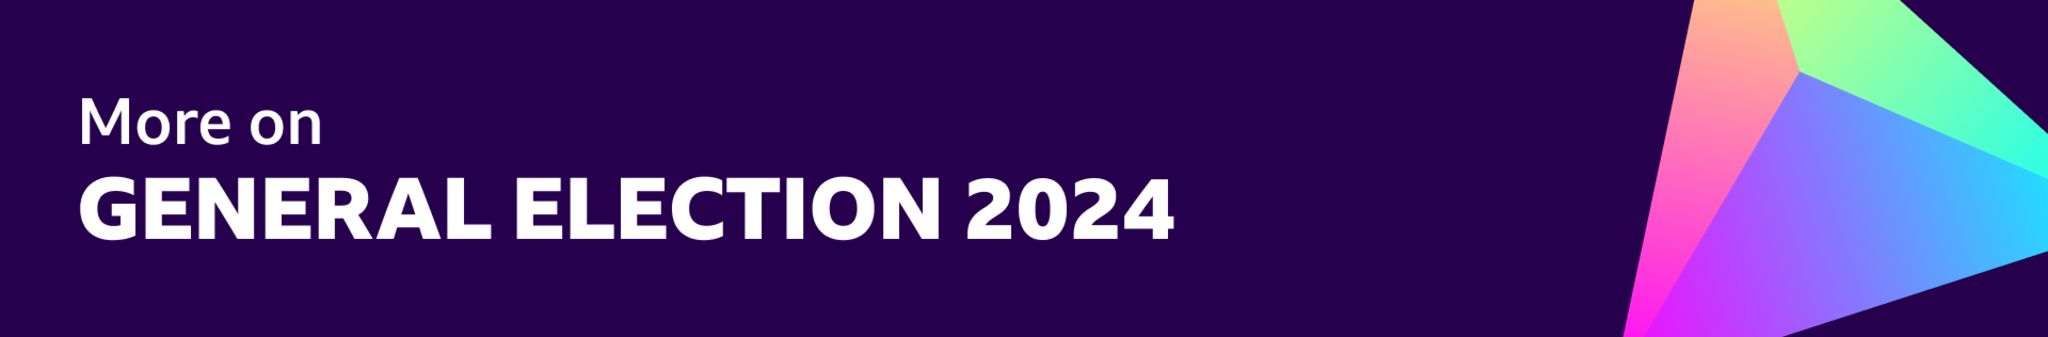 More on General Election 2024 BBC banner